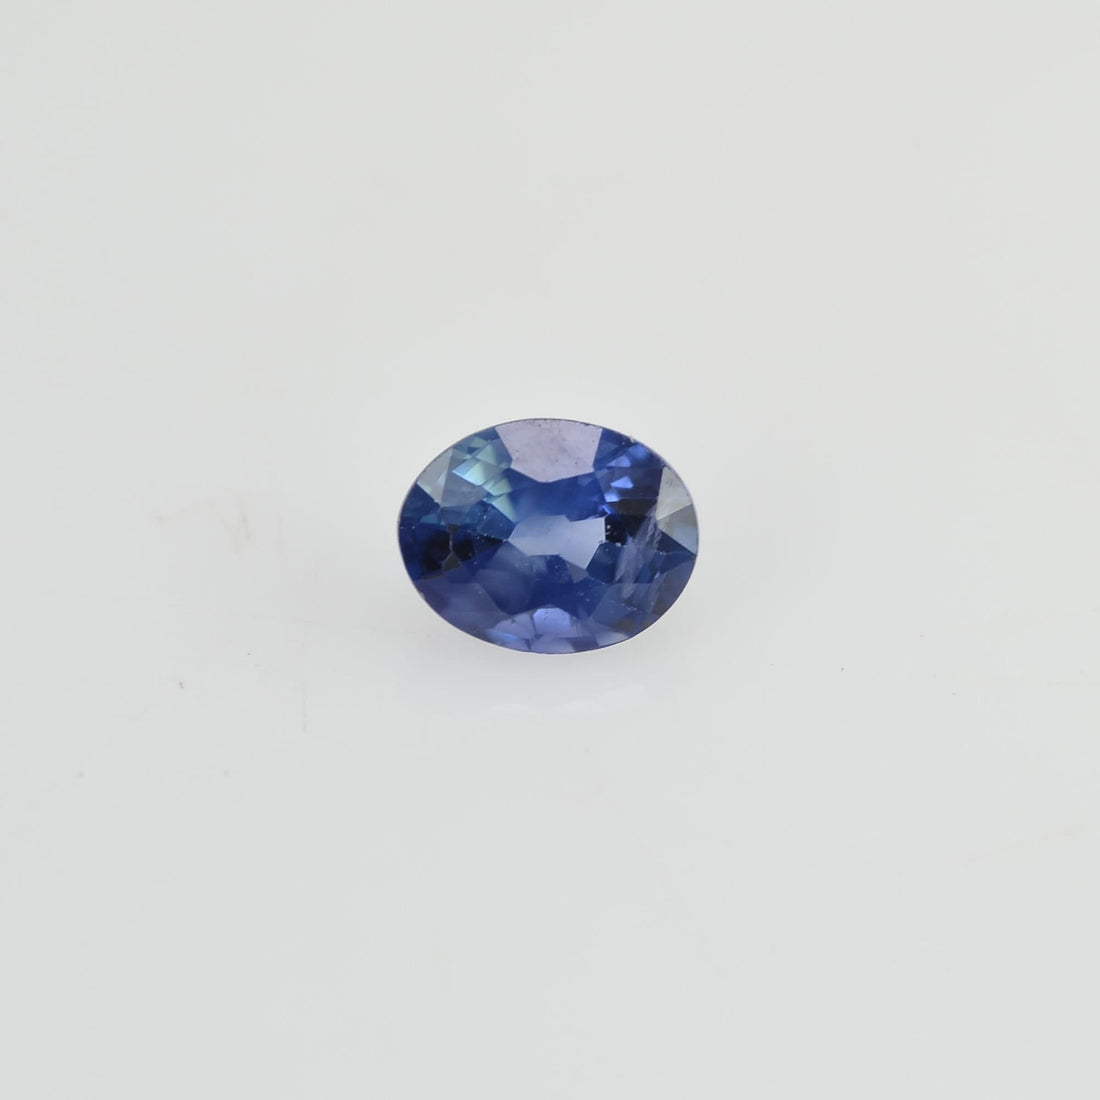 0.26 Cts Natural Blue Sapphire Loose Gemstone Oval Cut